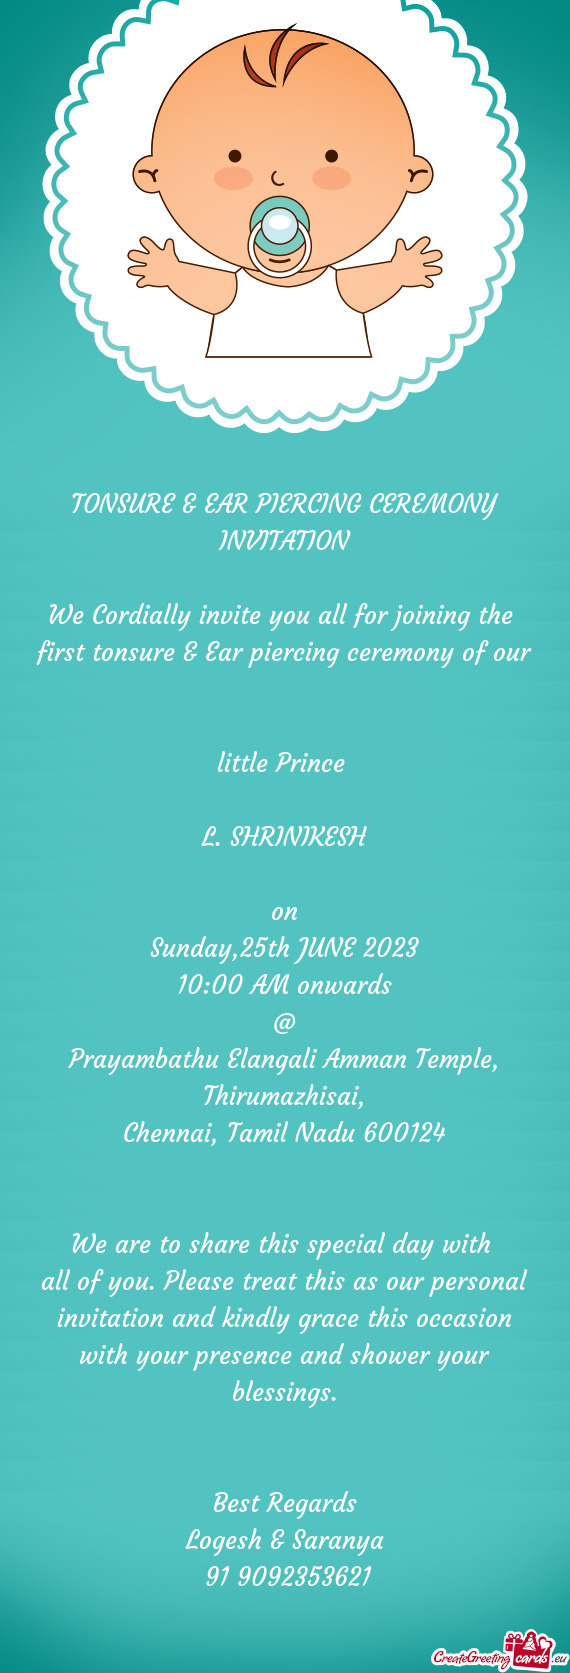 First tonsure & Ear piercing ceremony of our